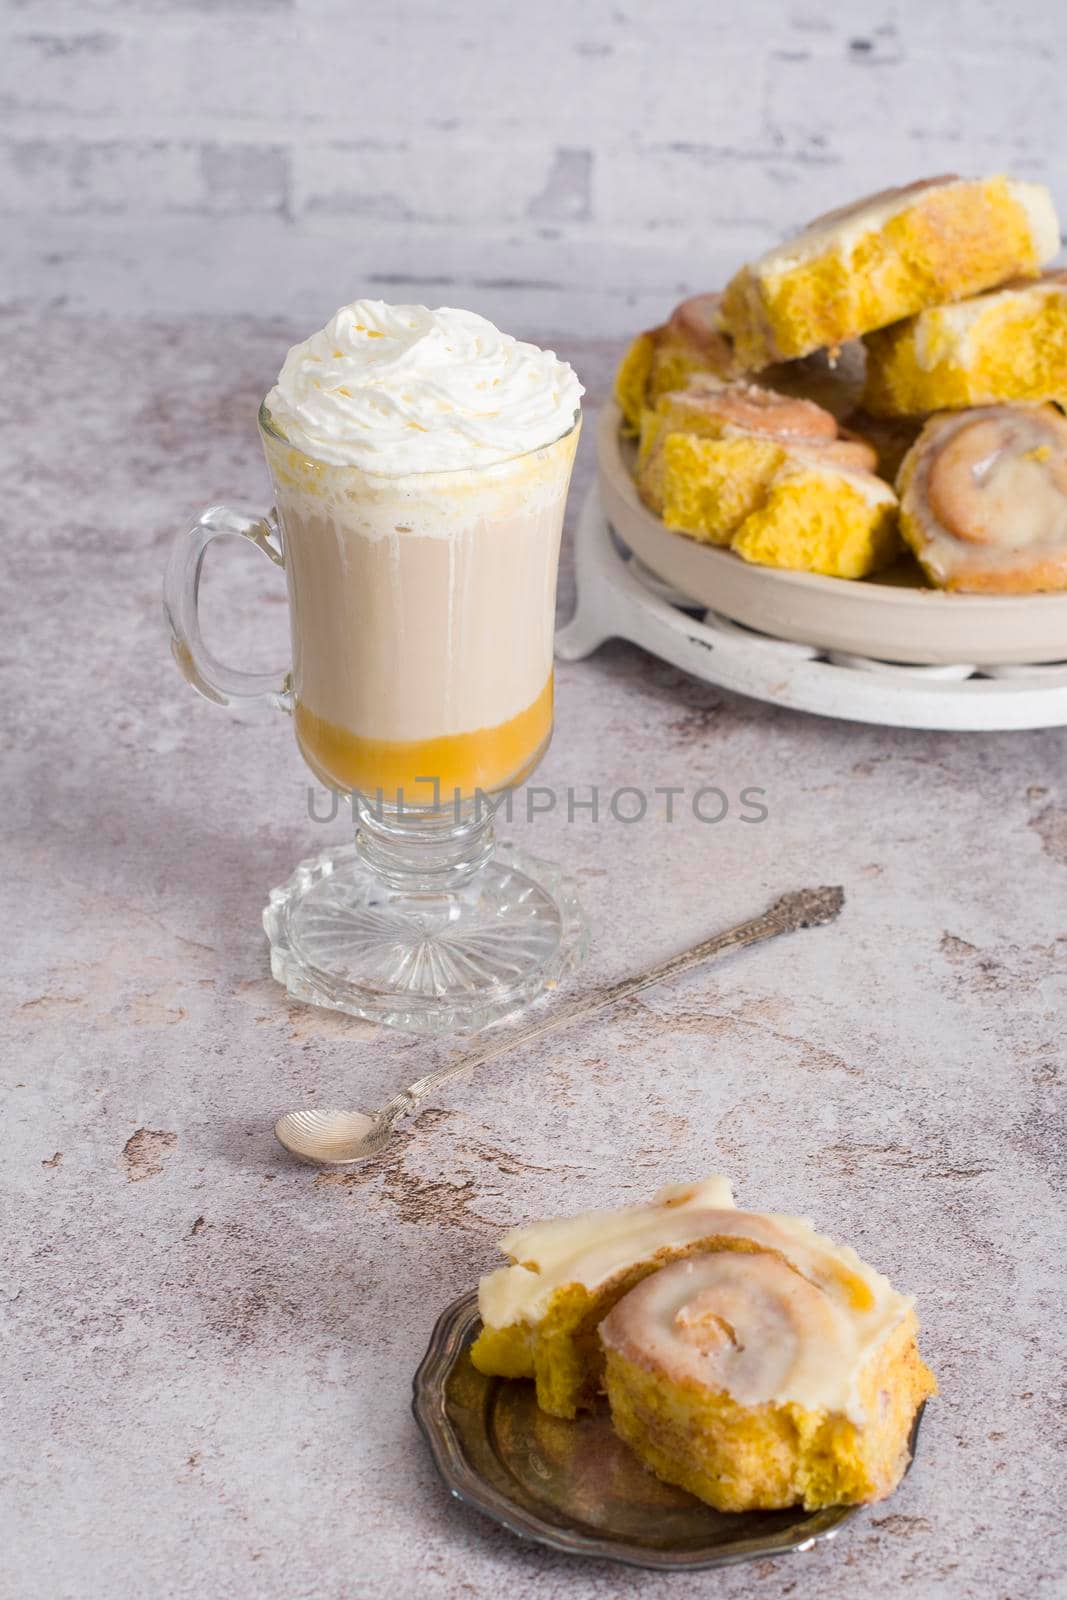 pumpkin cinnabons and latte for dessert, holiday table with pastries, home sweet home, autumn menu. High quality photo